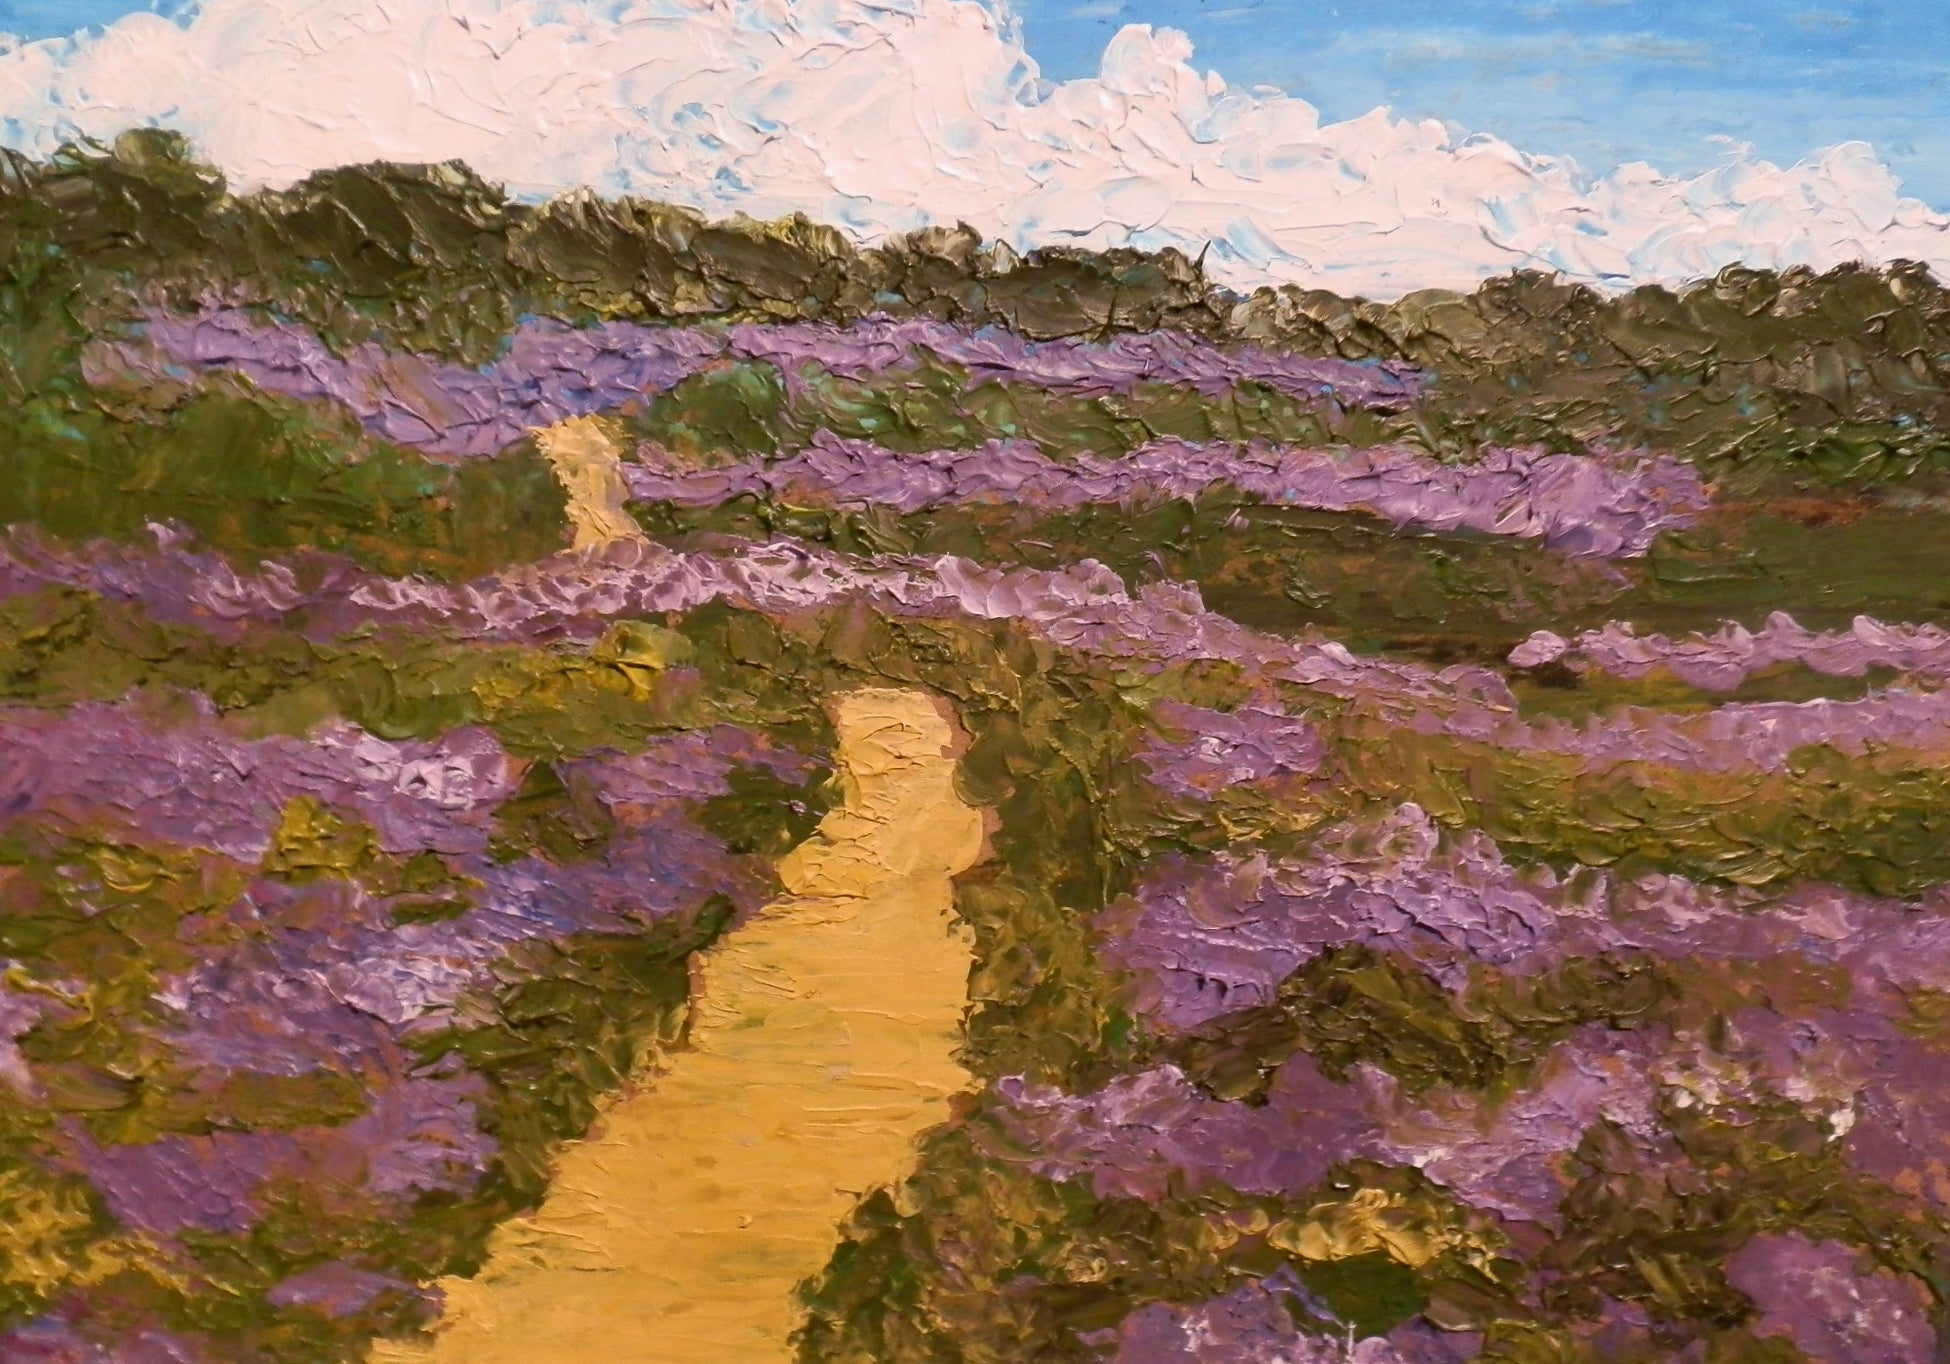 Pathway through the field of purples